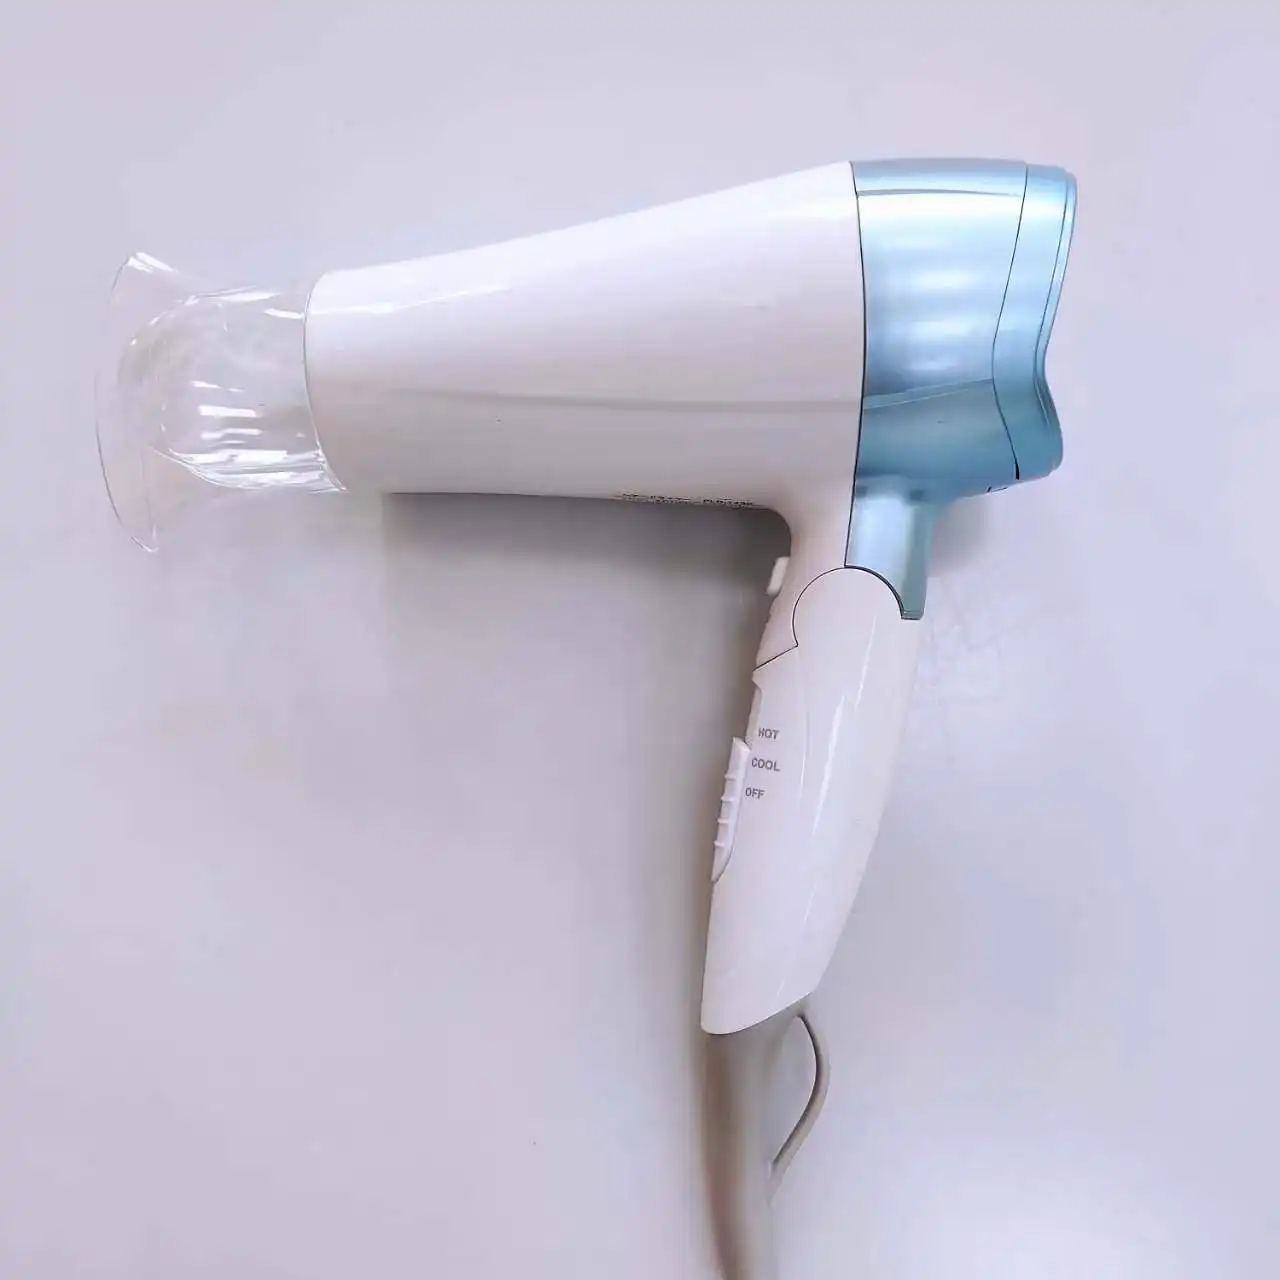 Portable 110000 RPM One Step Hairdryer 2000W Hot And Cold Air Salon Hair Dryer